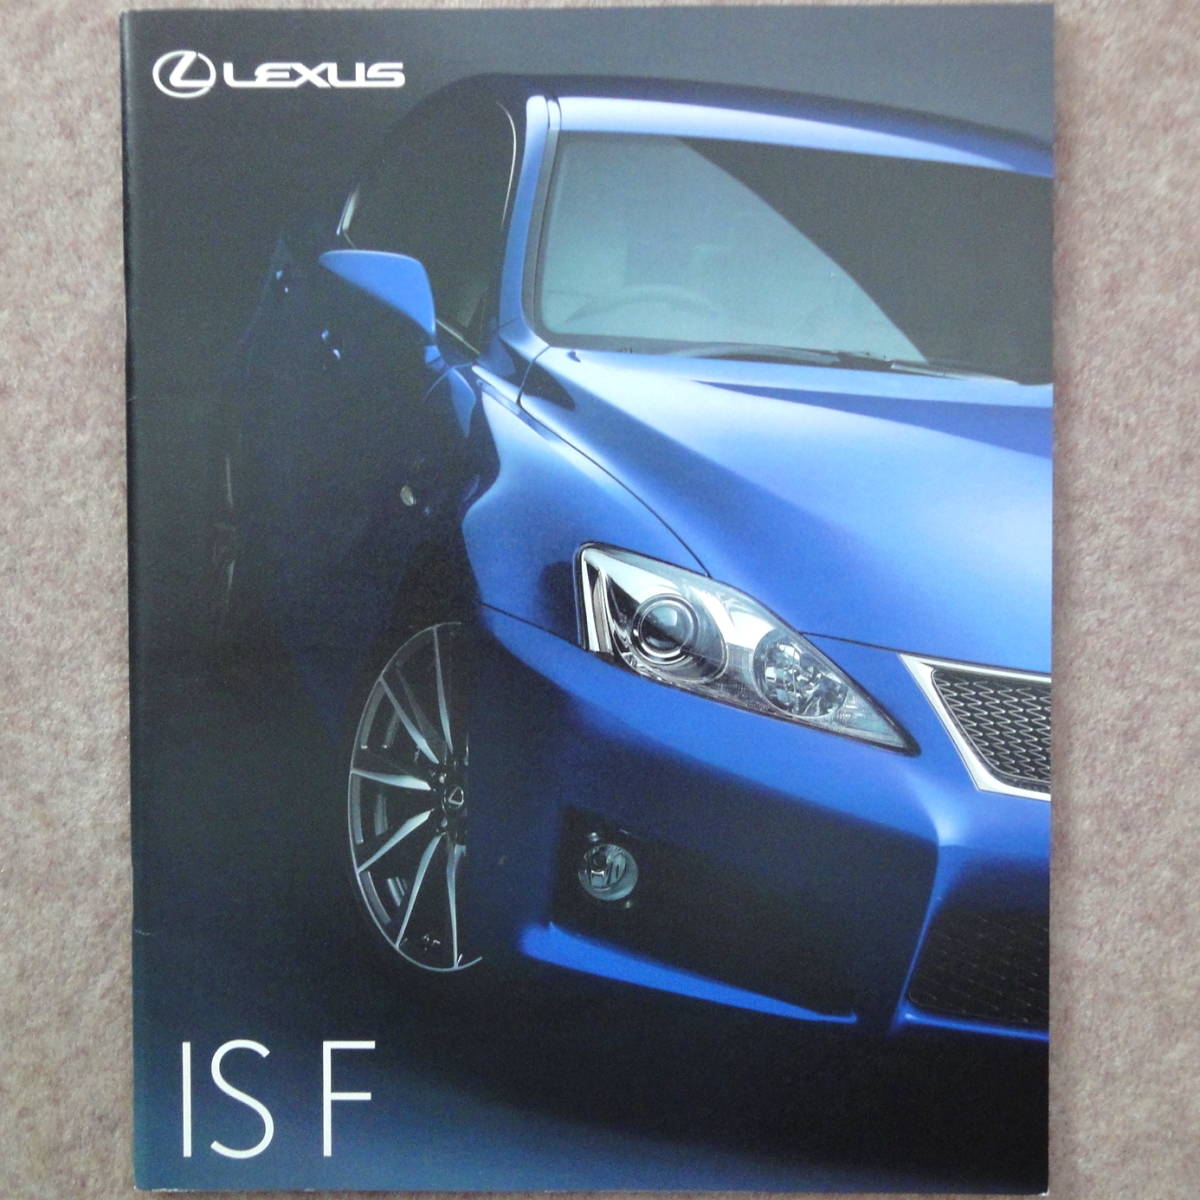  Lexus IS-F catalog lexus ISF IS USE 20 type 2007 year 10 month 